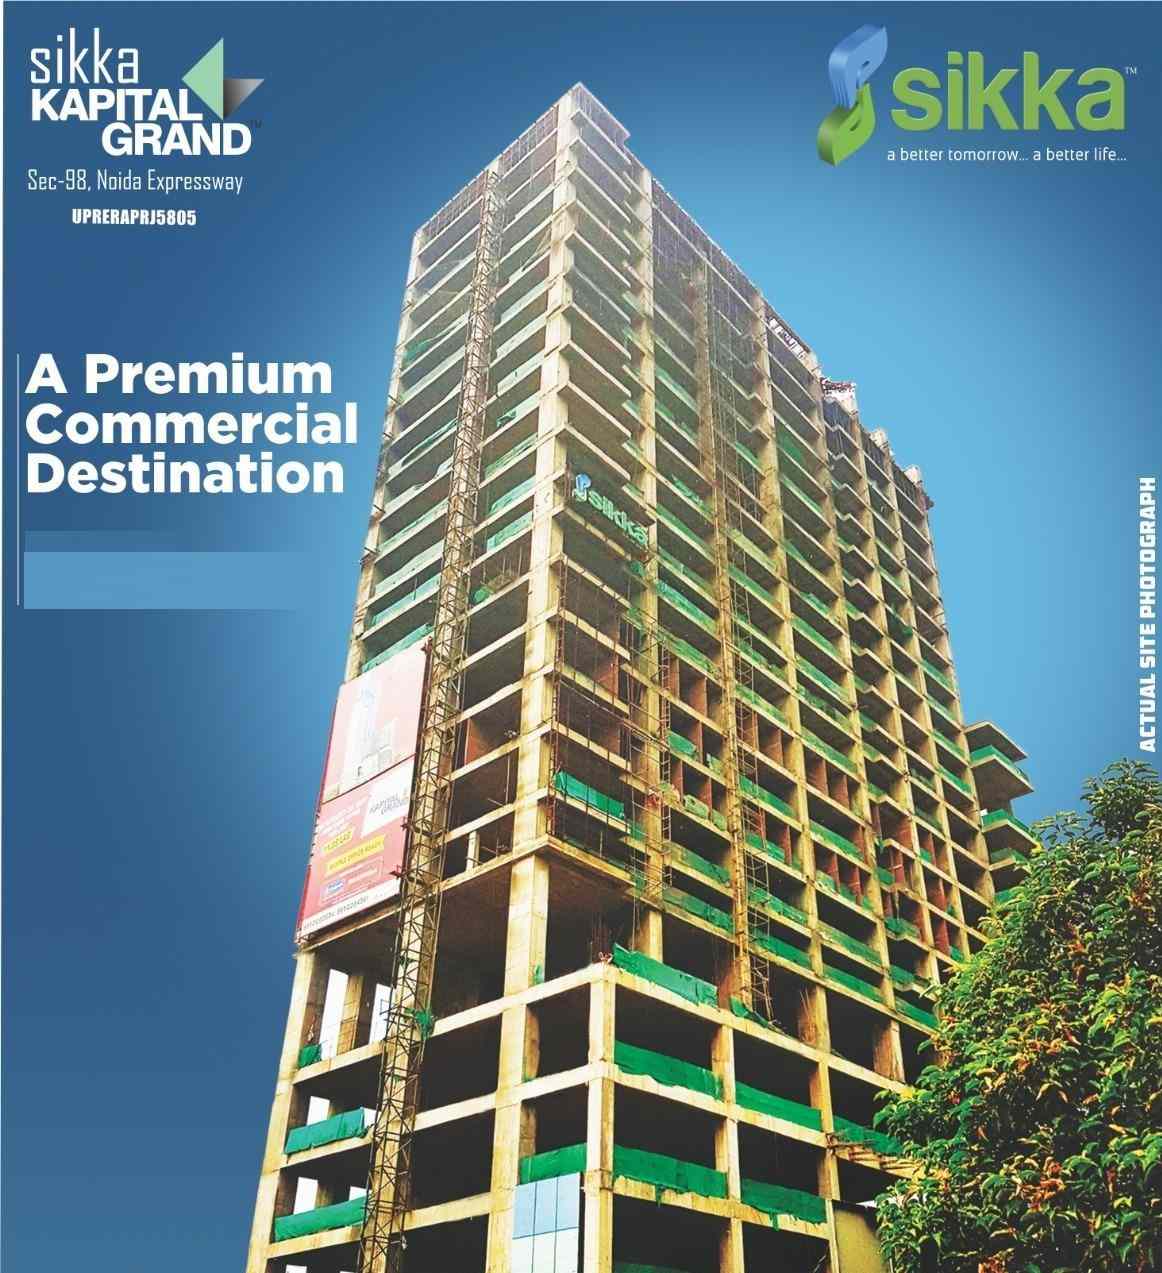 Book the perfect place for your office at Sikka The Downtown Kapital Grand in Noida Update